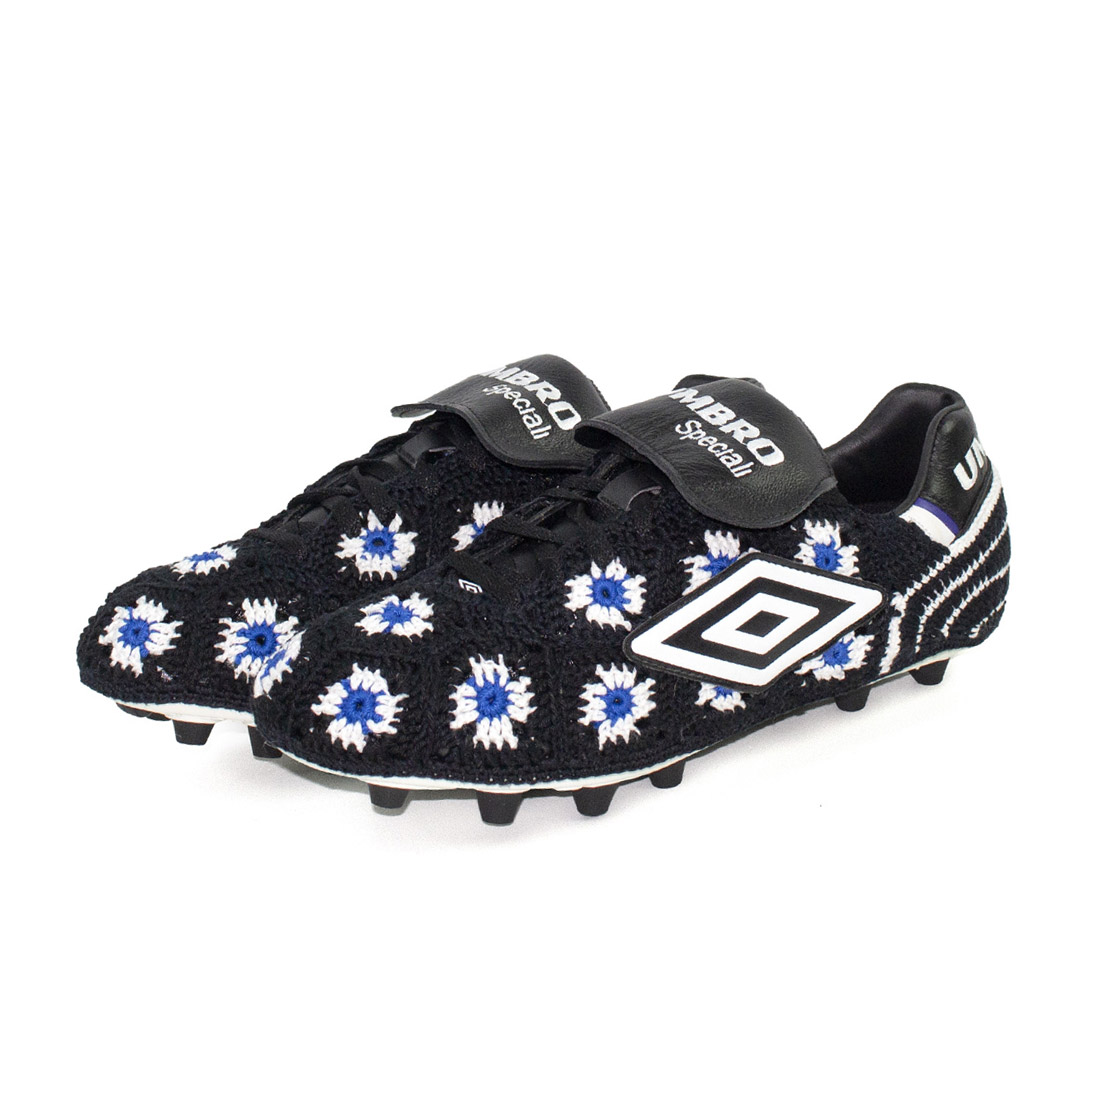 LC23 x Umbro Speciali 30th Anniversary Collectable Boots